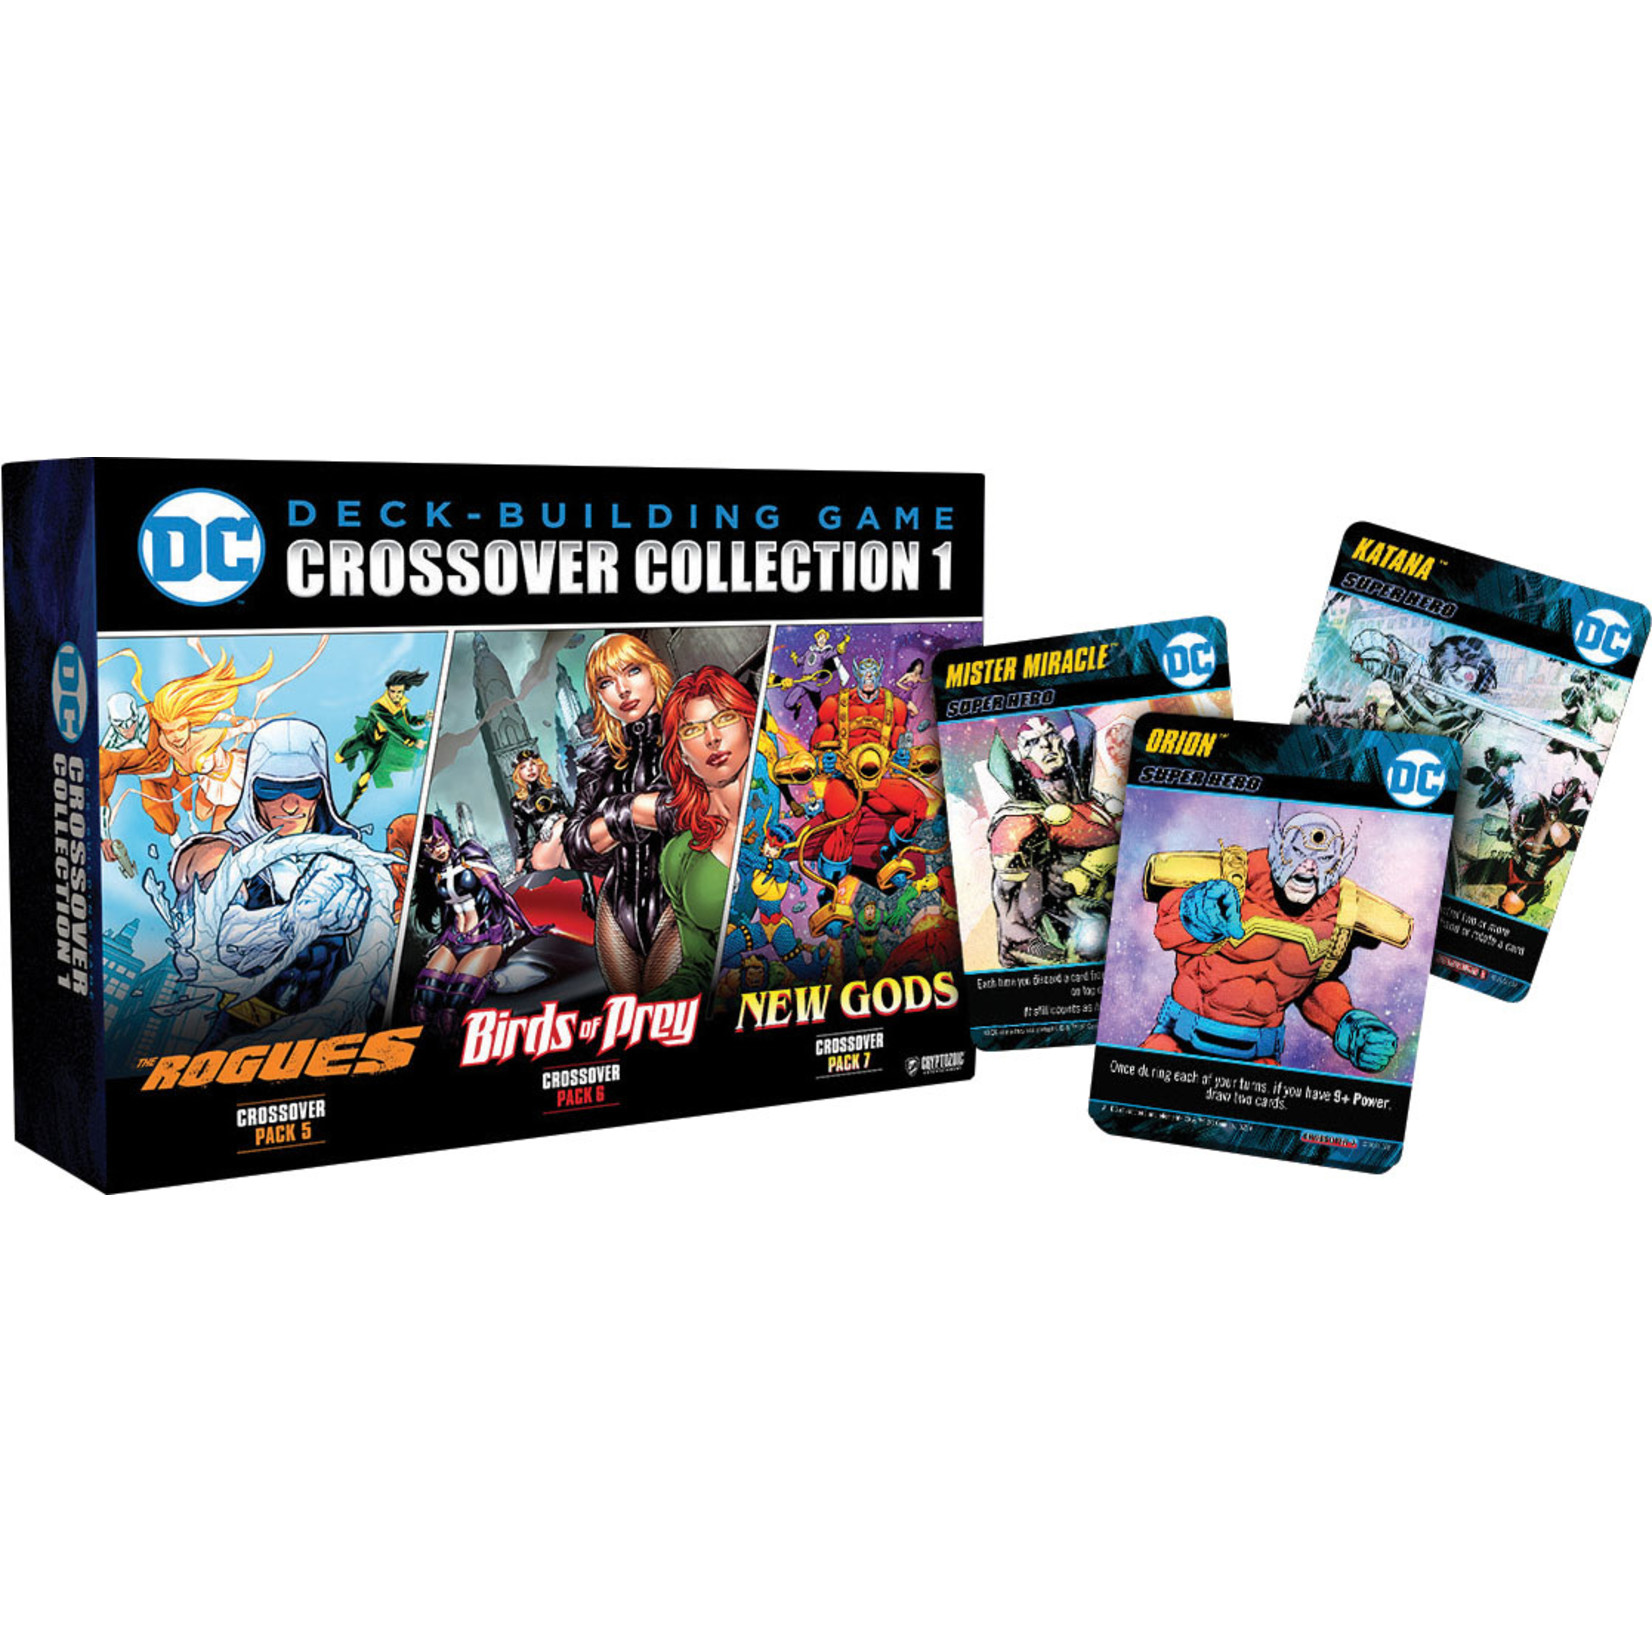 Cryptozoic Entertainment DC Comics DBG Crossover Collection 1